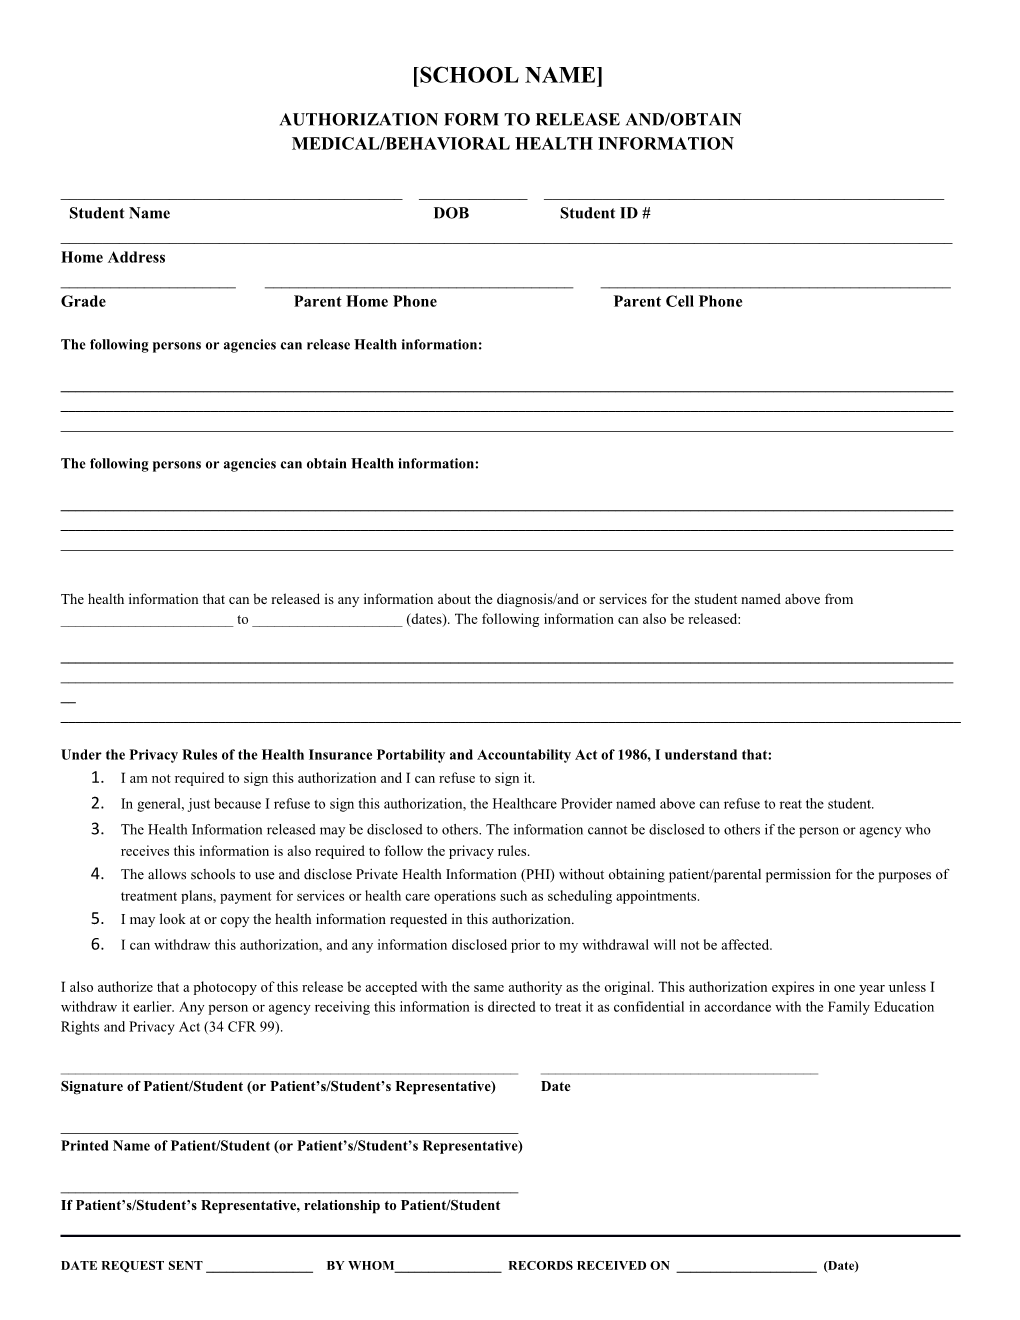 Authorization Form to Release And/Obtain